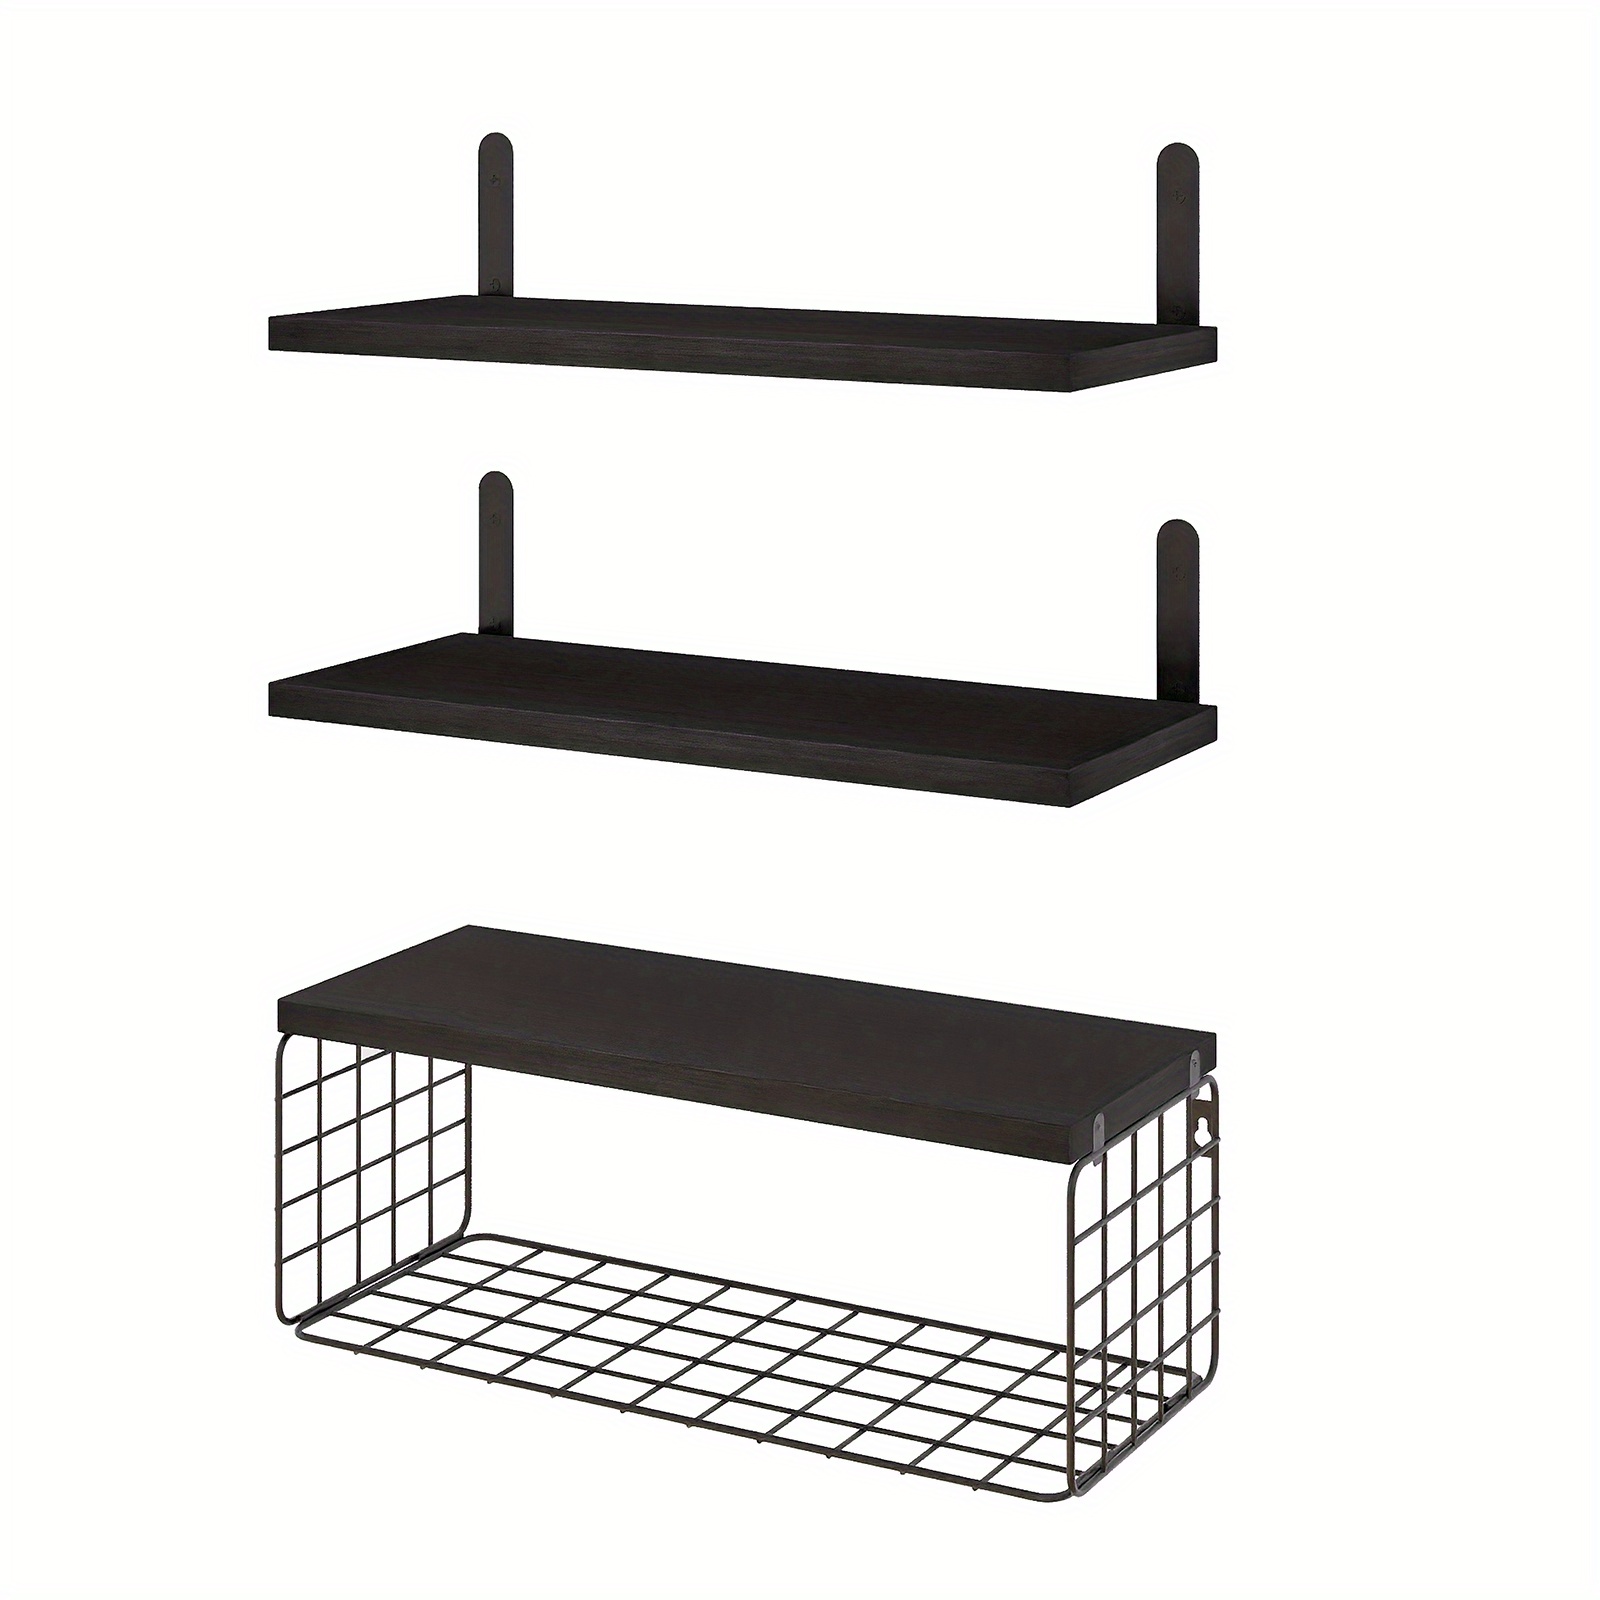  mDesign Metal Wire 3-Tier Hanging Shelf for Bathroom Storage -  Wall Mounted Decorative Shelves - Floating Metal Bathroom Shelf Basket -  Bathroom Wall Shelving - Concerto Collection - Black : Home & Kitchen